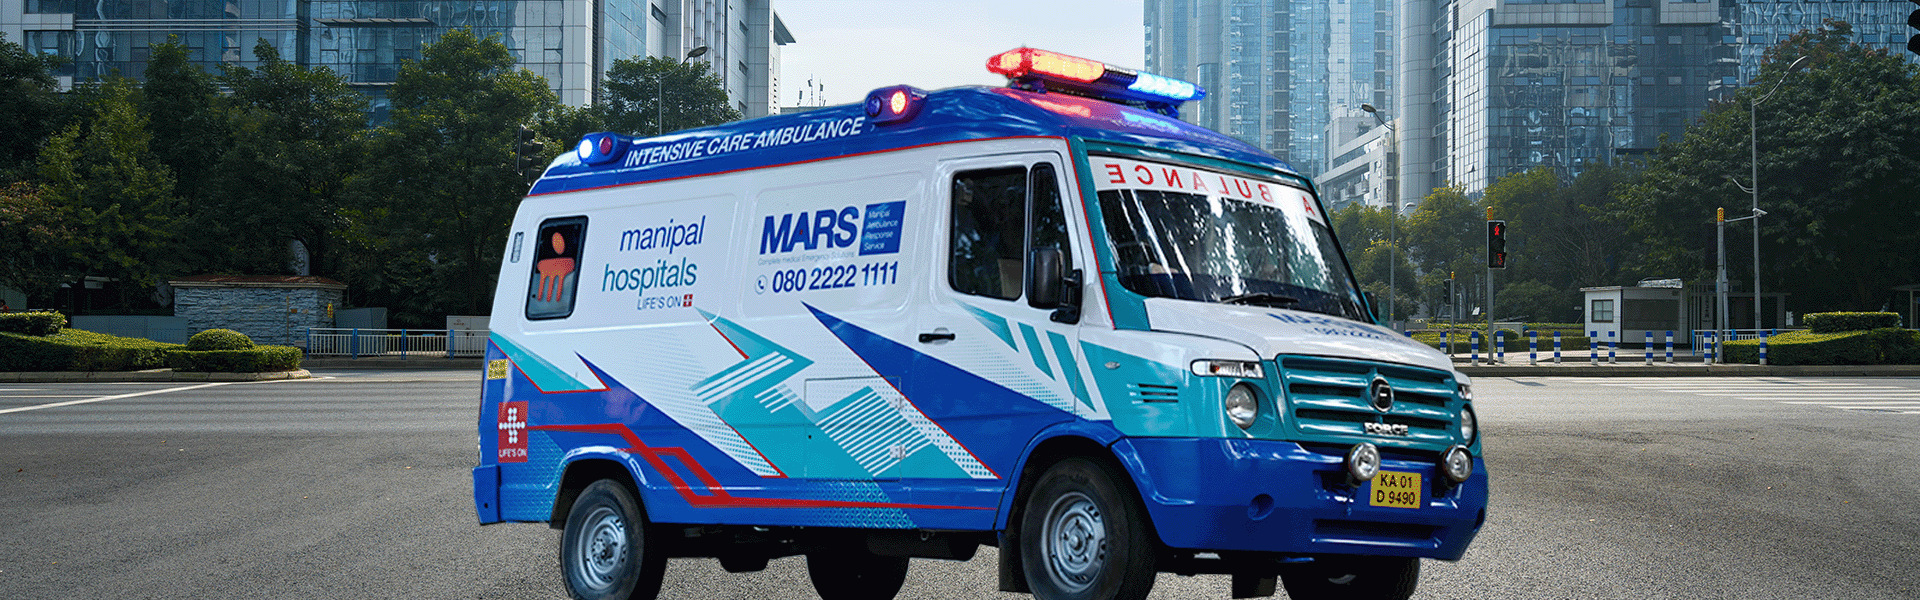 https://www.manipalhospitals.com/whitefield/uploads/page-banners/manipal-hospitals-ambulance-response-services.png